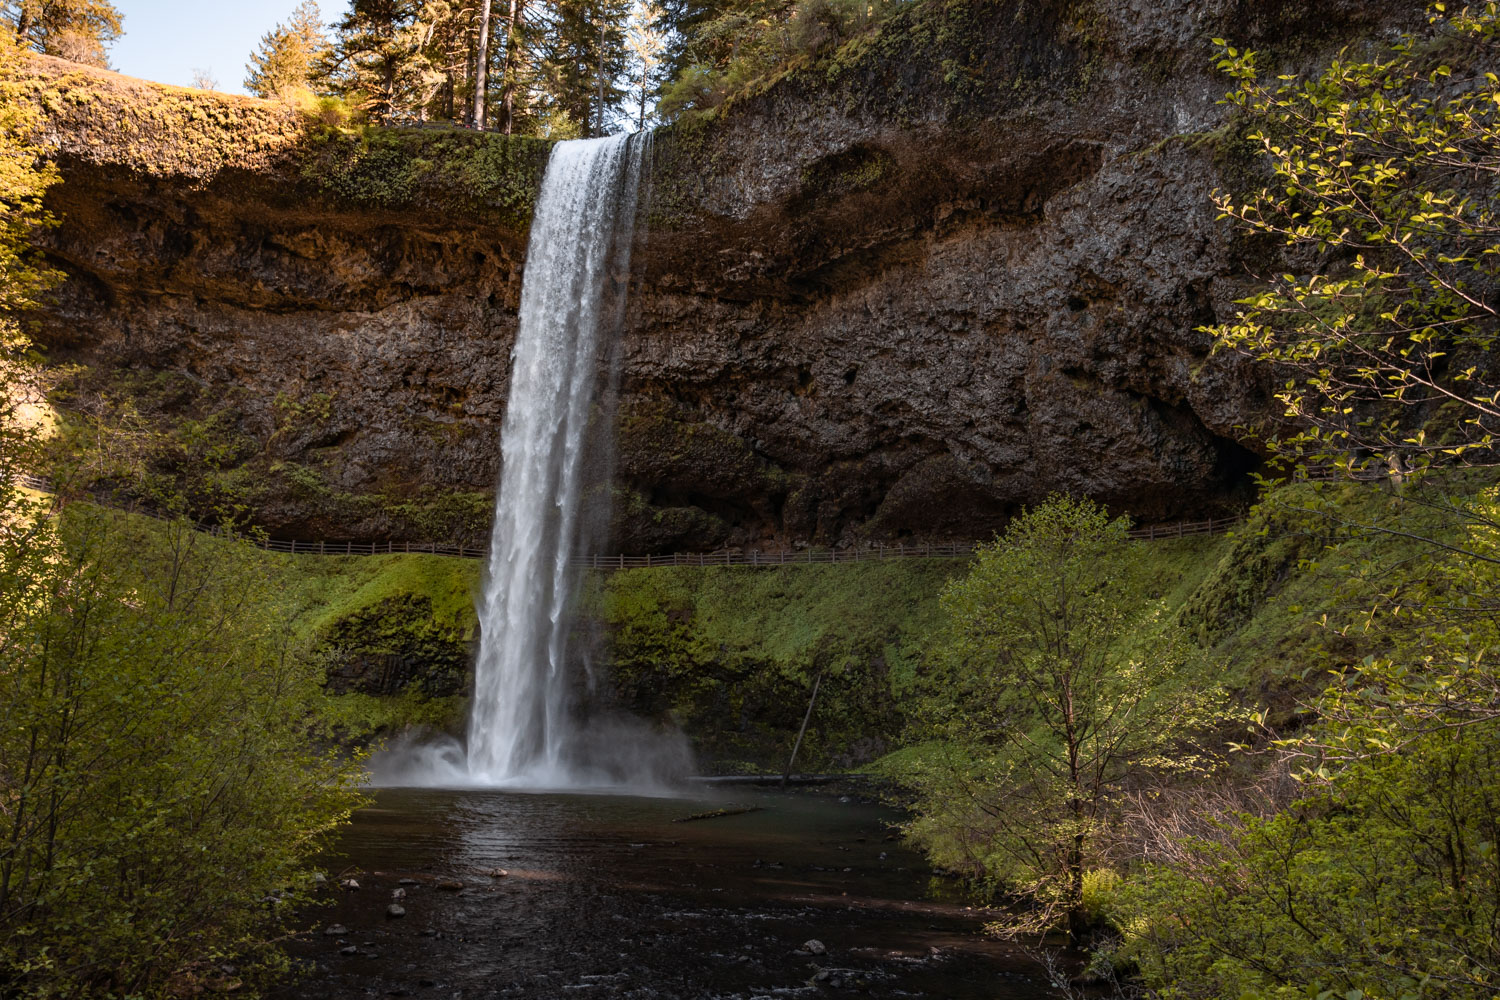 South Falls in Silver Falls State Park on the Trail of Ten Falls